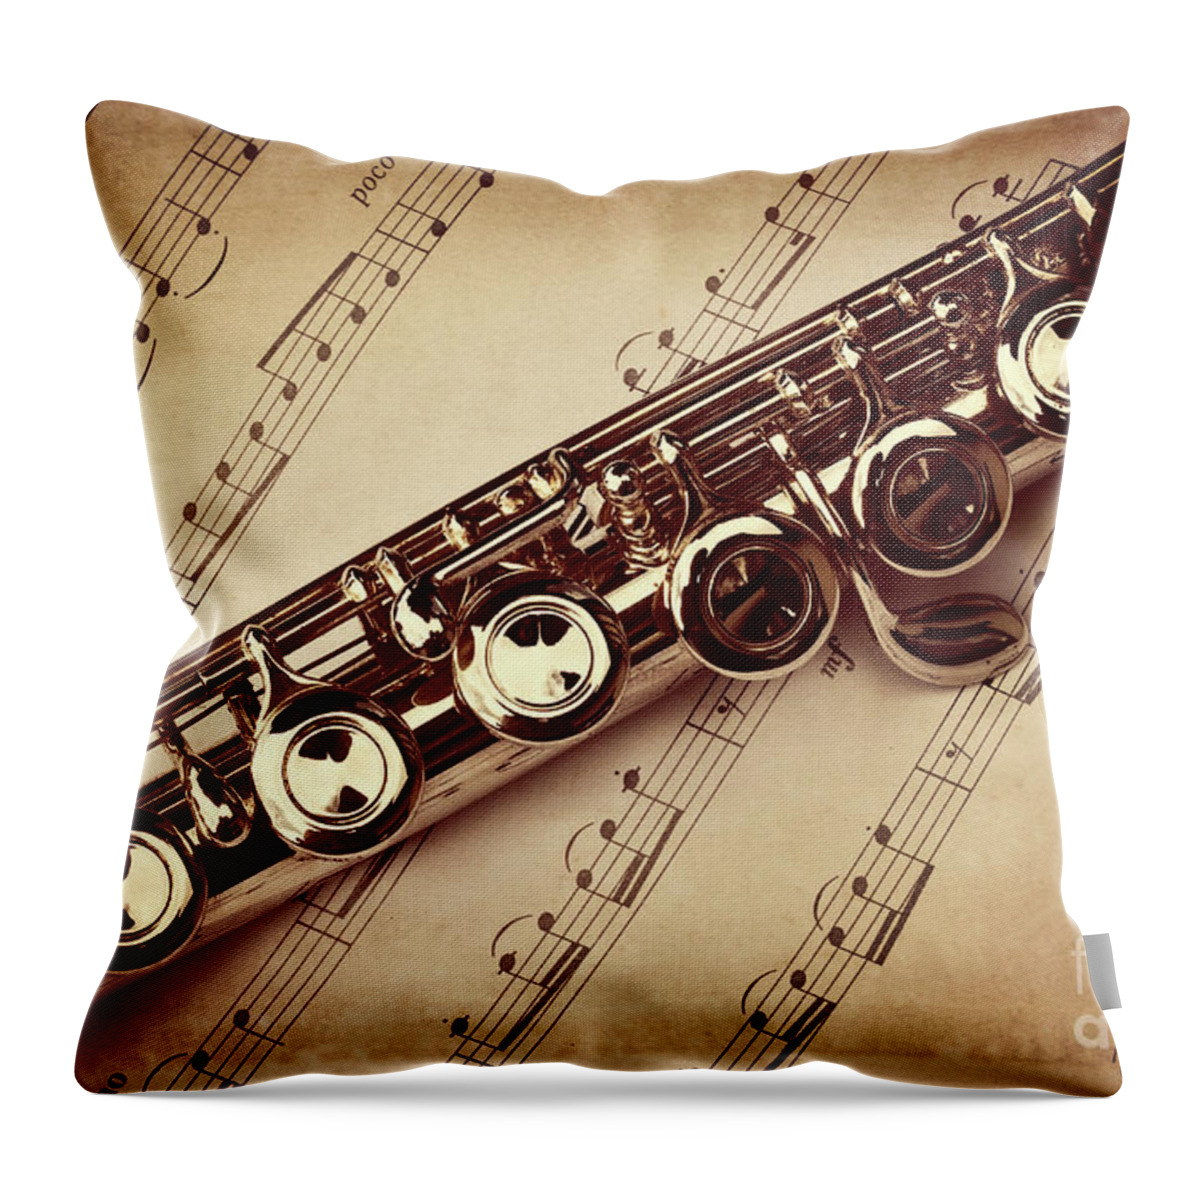 Flute Throw Pillow featuring the photograph Flute vintage style by Delphimages Photo Creations